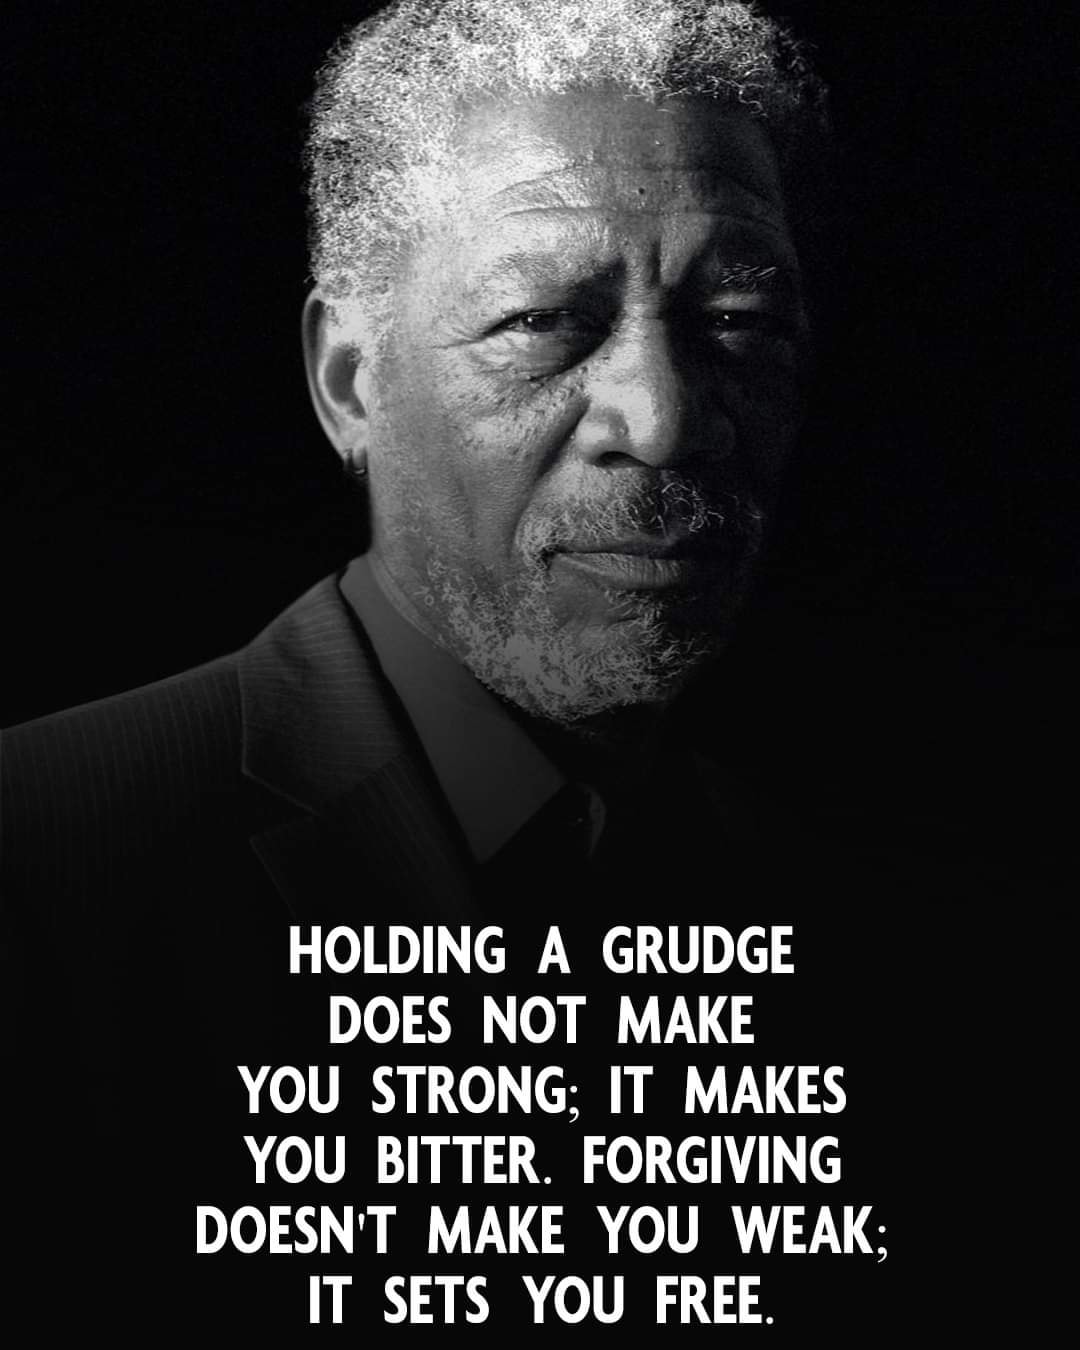 Holding a grudge doesn’t make you stronger; it makes you bitter. Forgiving doesn’t make you weak, it sets you free.